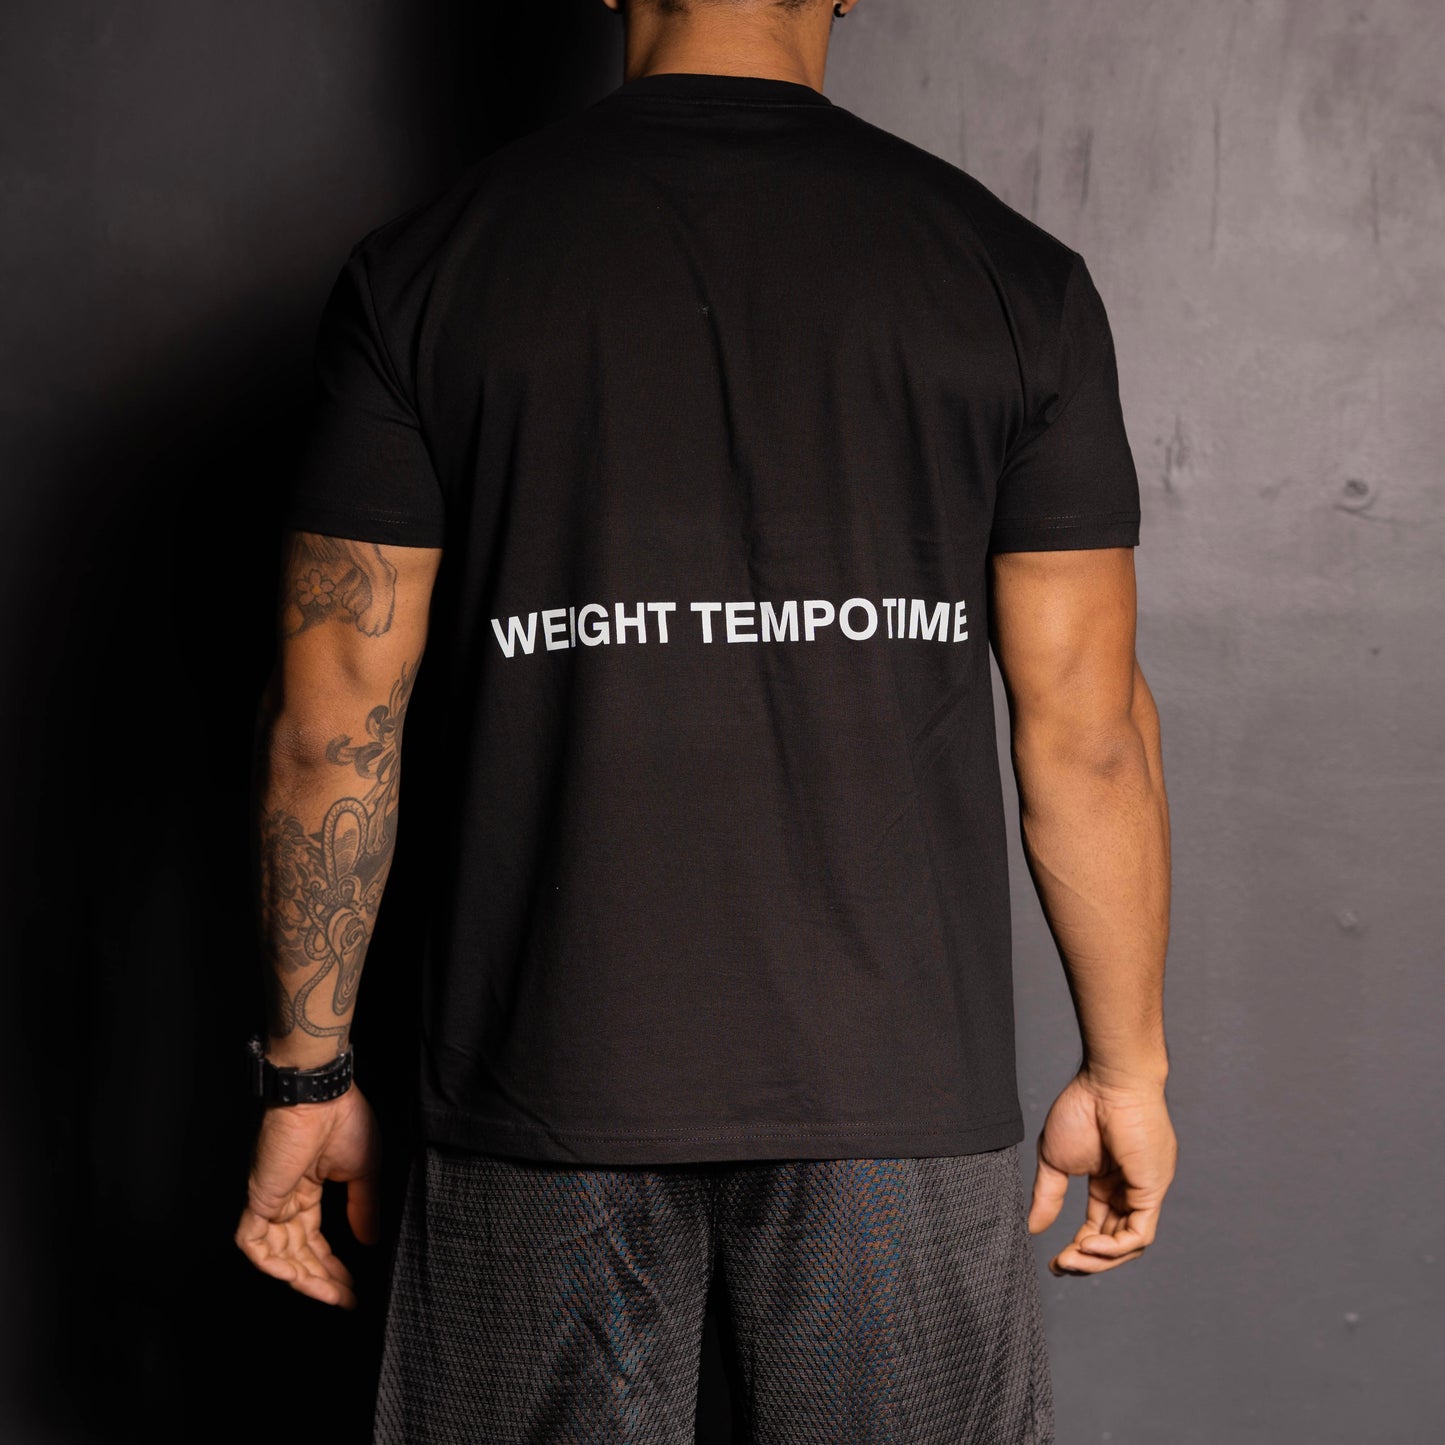 UNIFORM - Unisex Weight Tempo Time S/S Tee